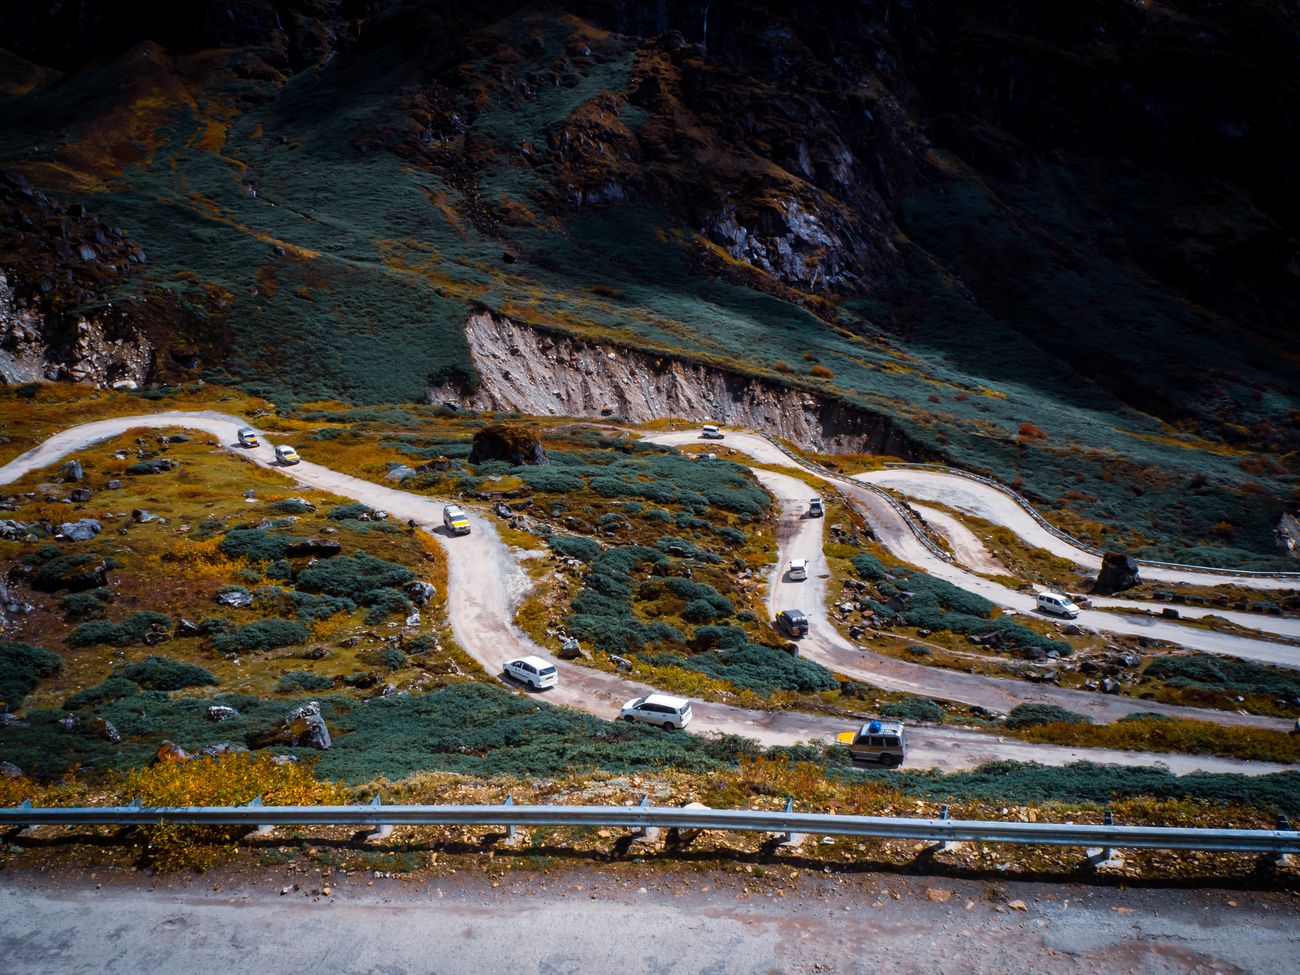 The roads leading to the Yumthang valley are full of the notorious hairpin curves that wind sharply, but offer an ever increasingly fascinating view of the valley below